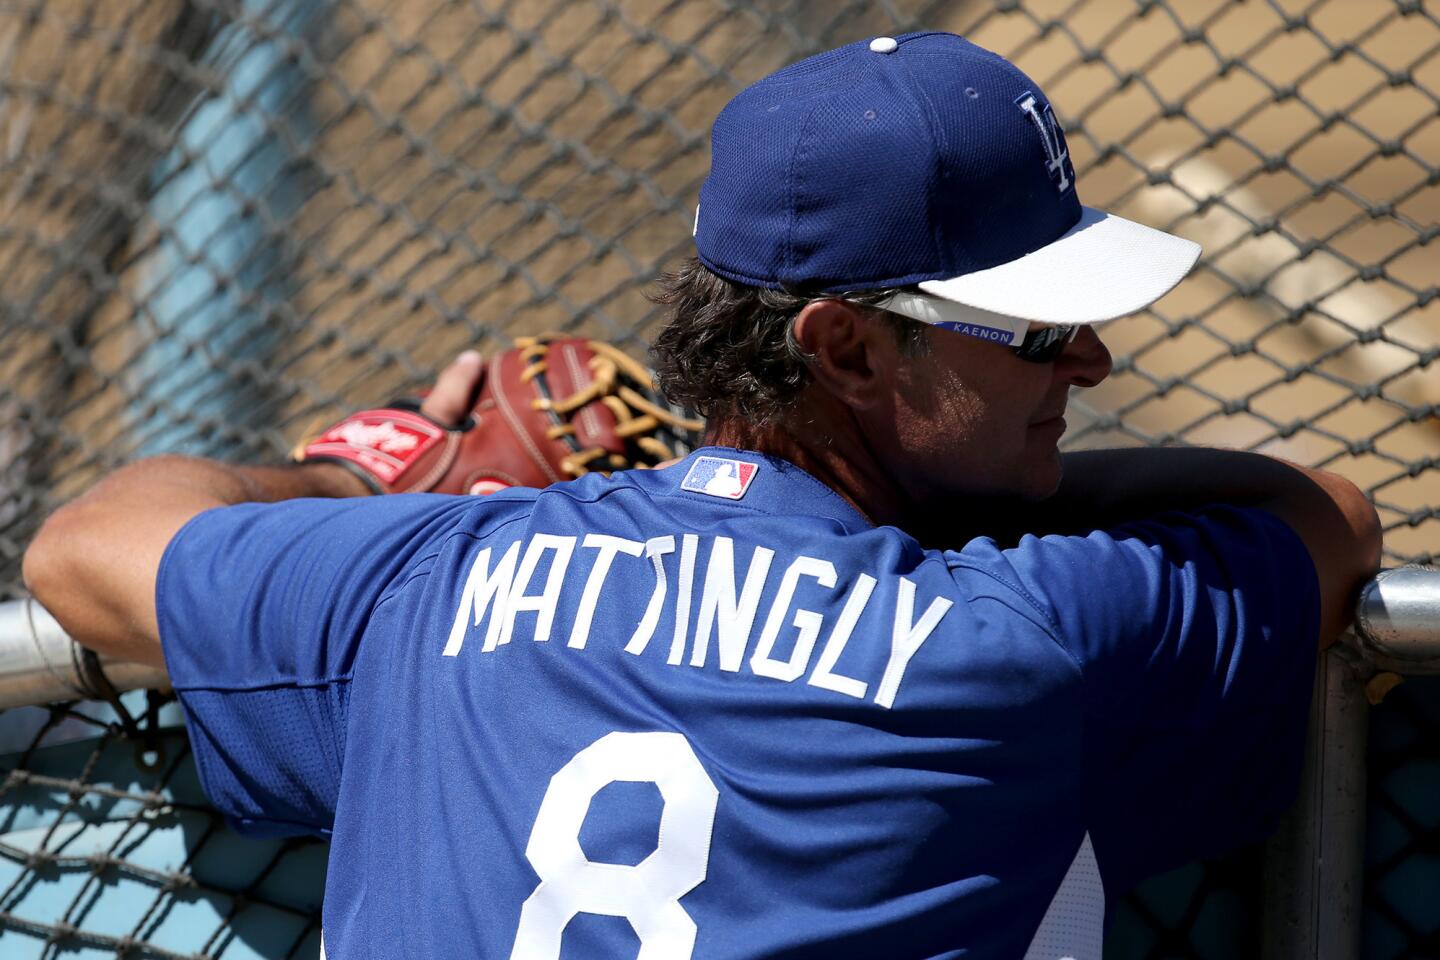 Five candidates to replace Don Mattingly as Dodgers manager - Los